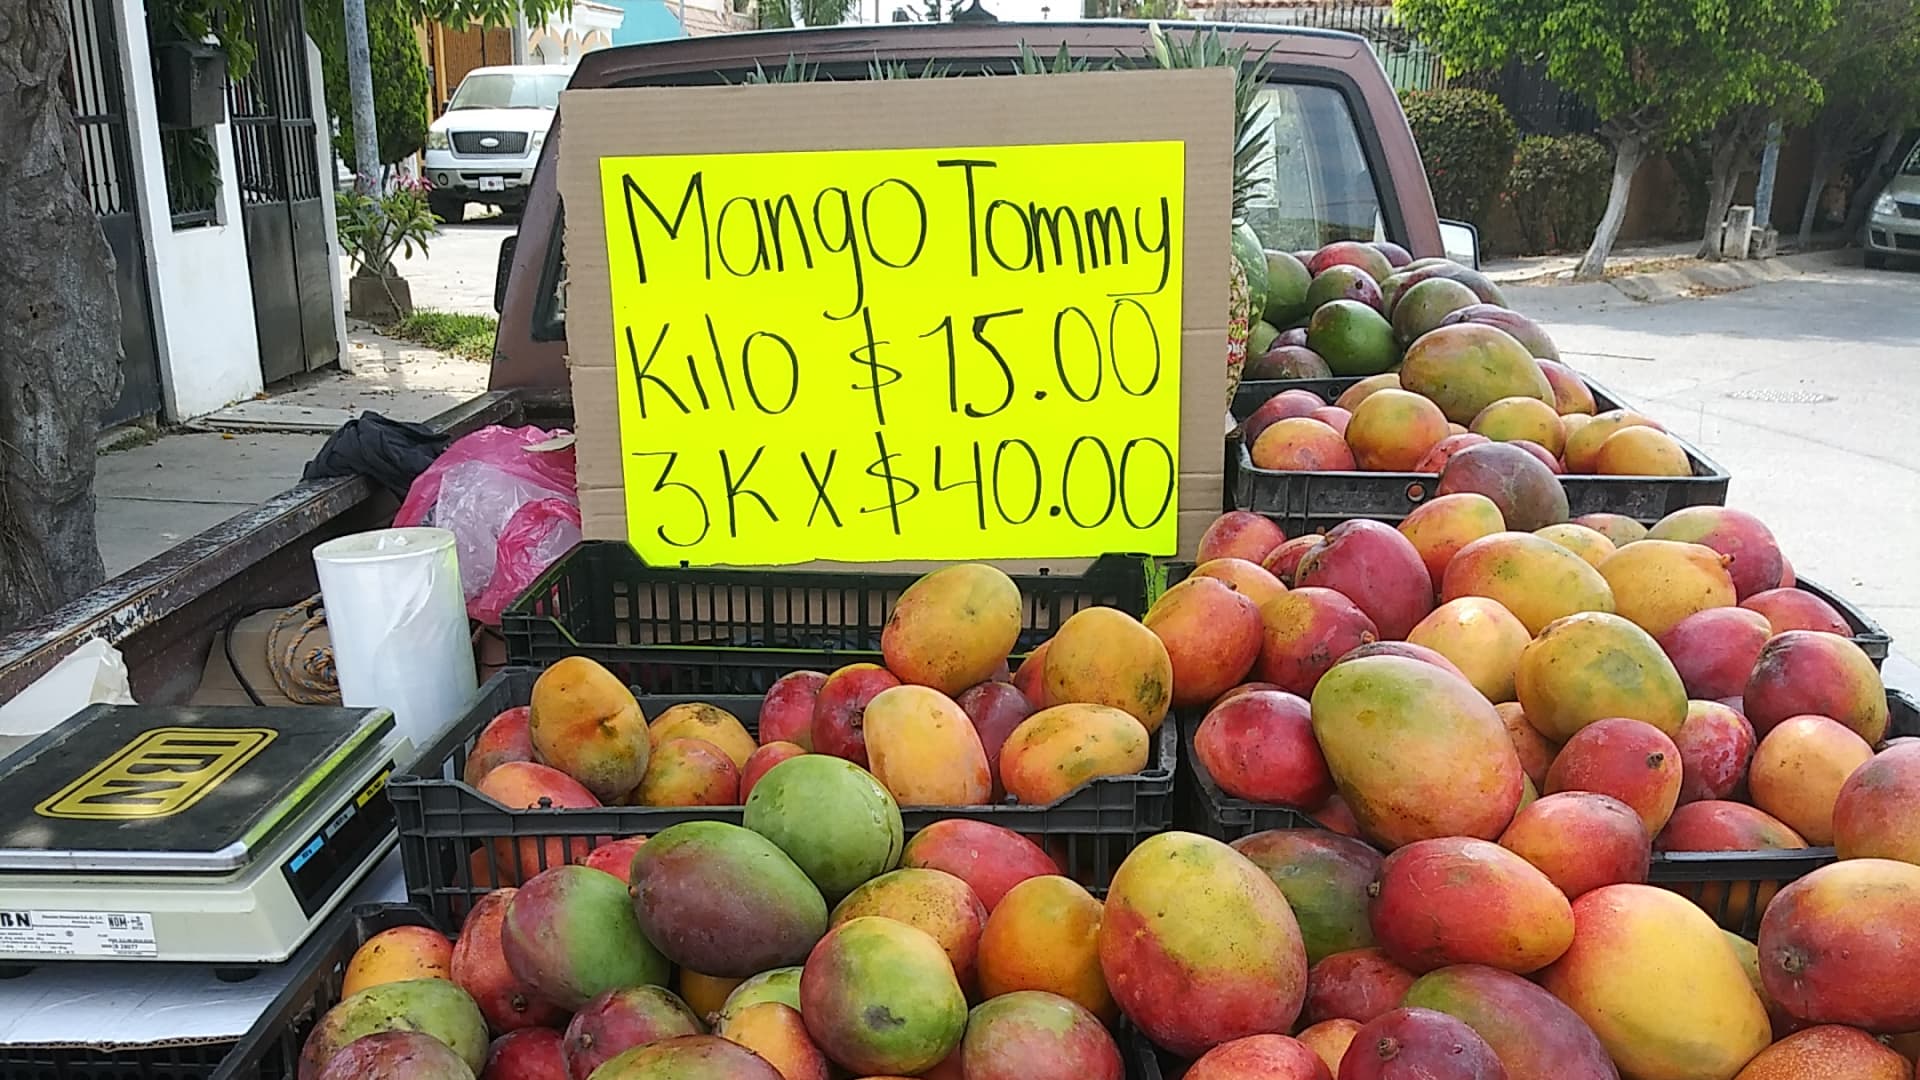 When mangos are in season, they're so cheap it's unbelievable. A kilogram is 2.2 pounds; 15 pesos isn't even $1. You do the math!